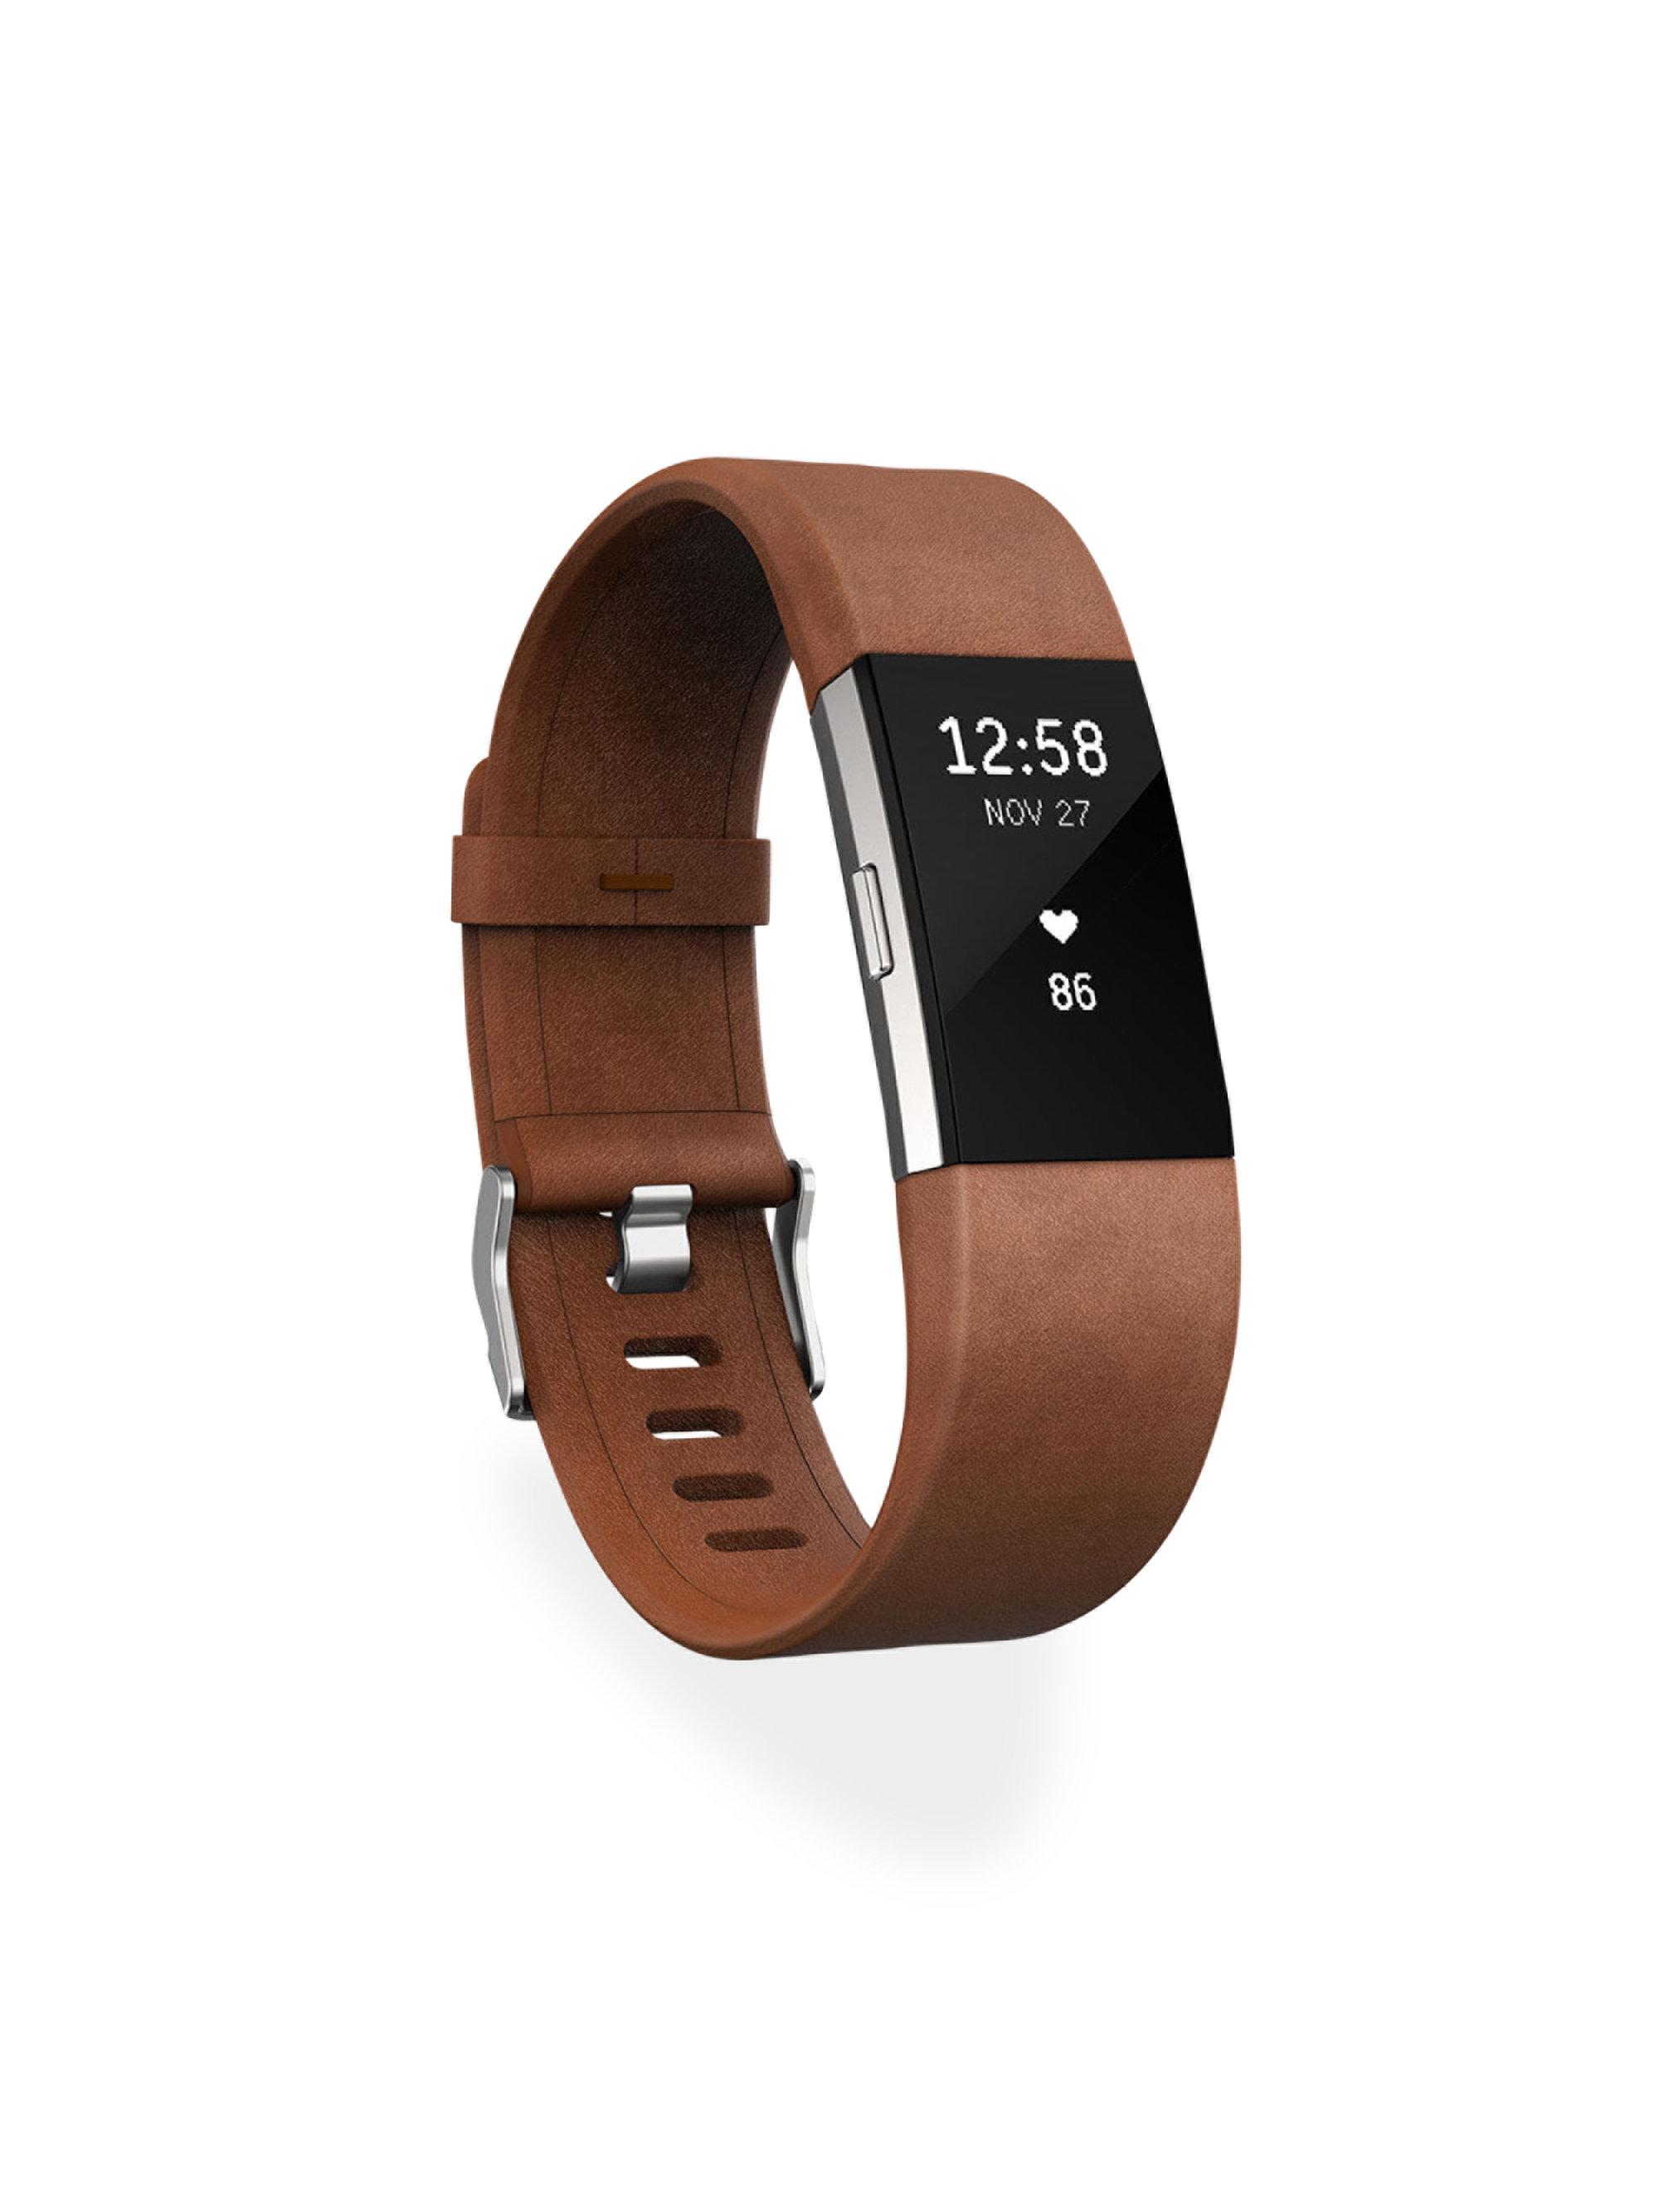 Fitbit luxe charger - qosapolitical